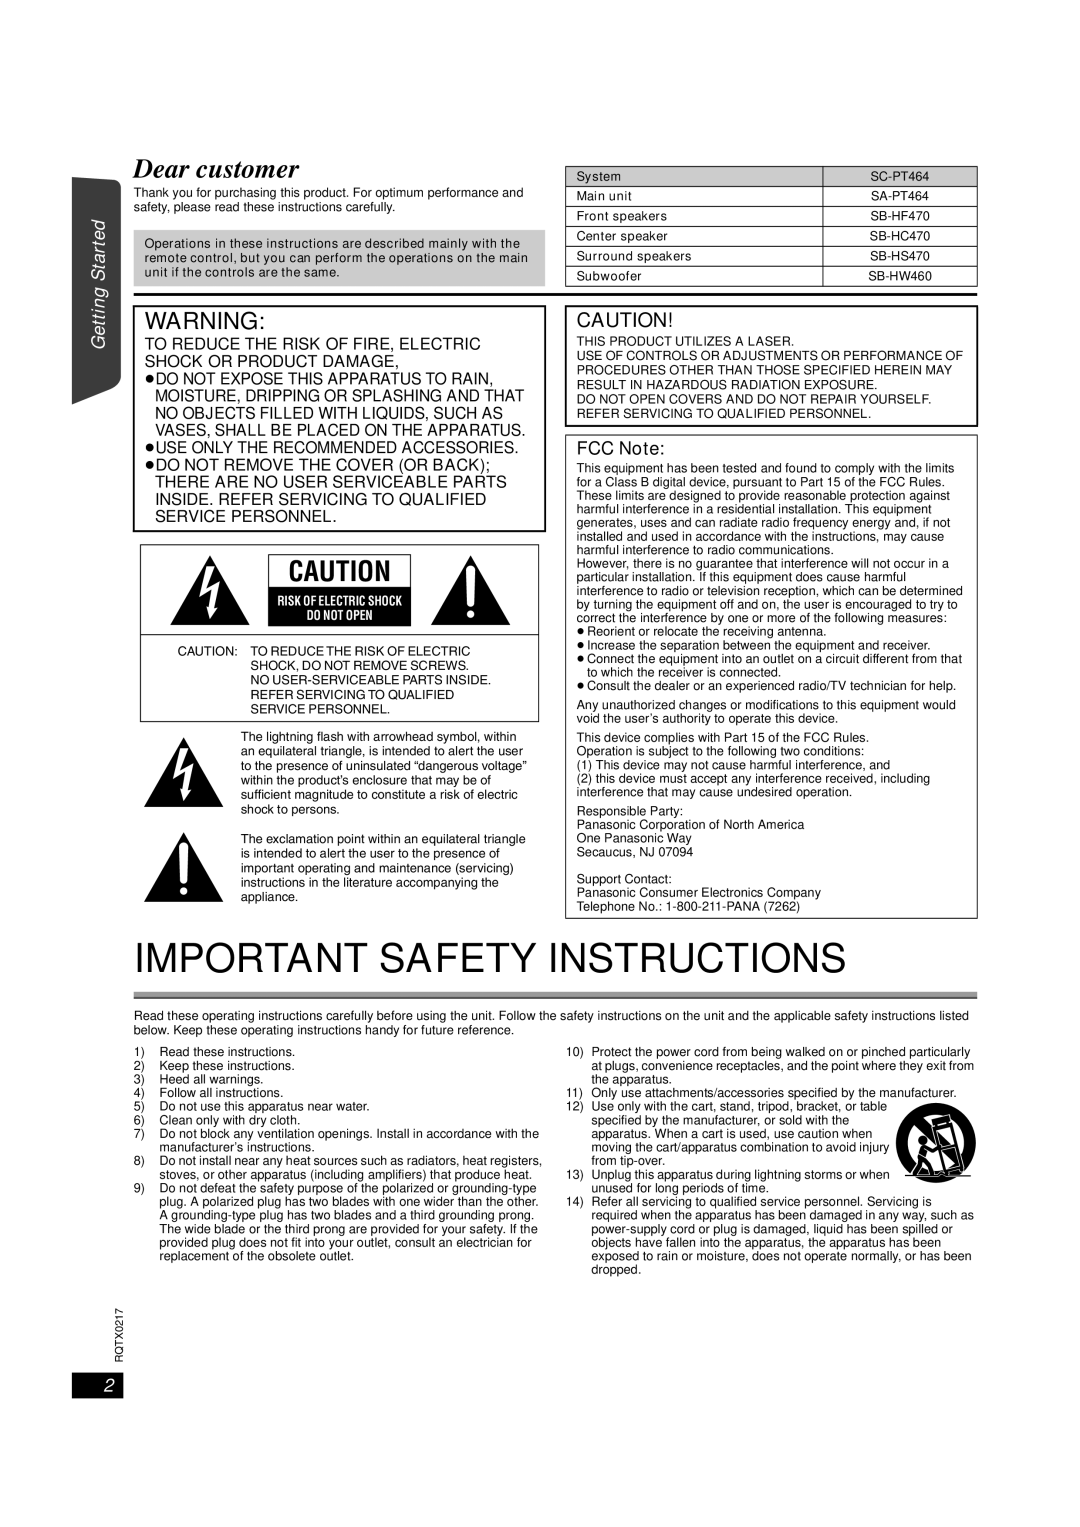 Panasonic SC-PT464 Started, Getting Playing Discs Other Operations Reference, FCC Note, Important Safety Instructions 